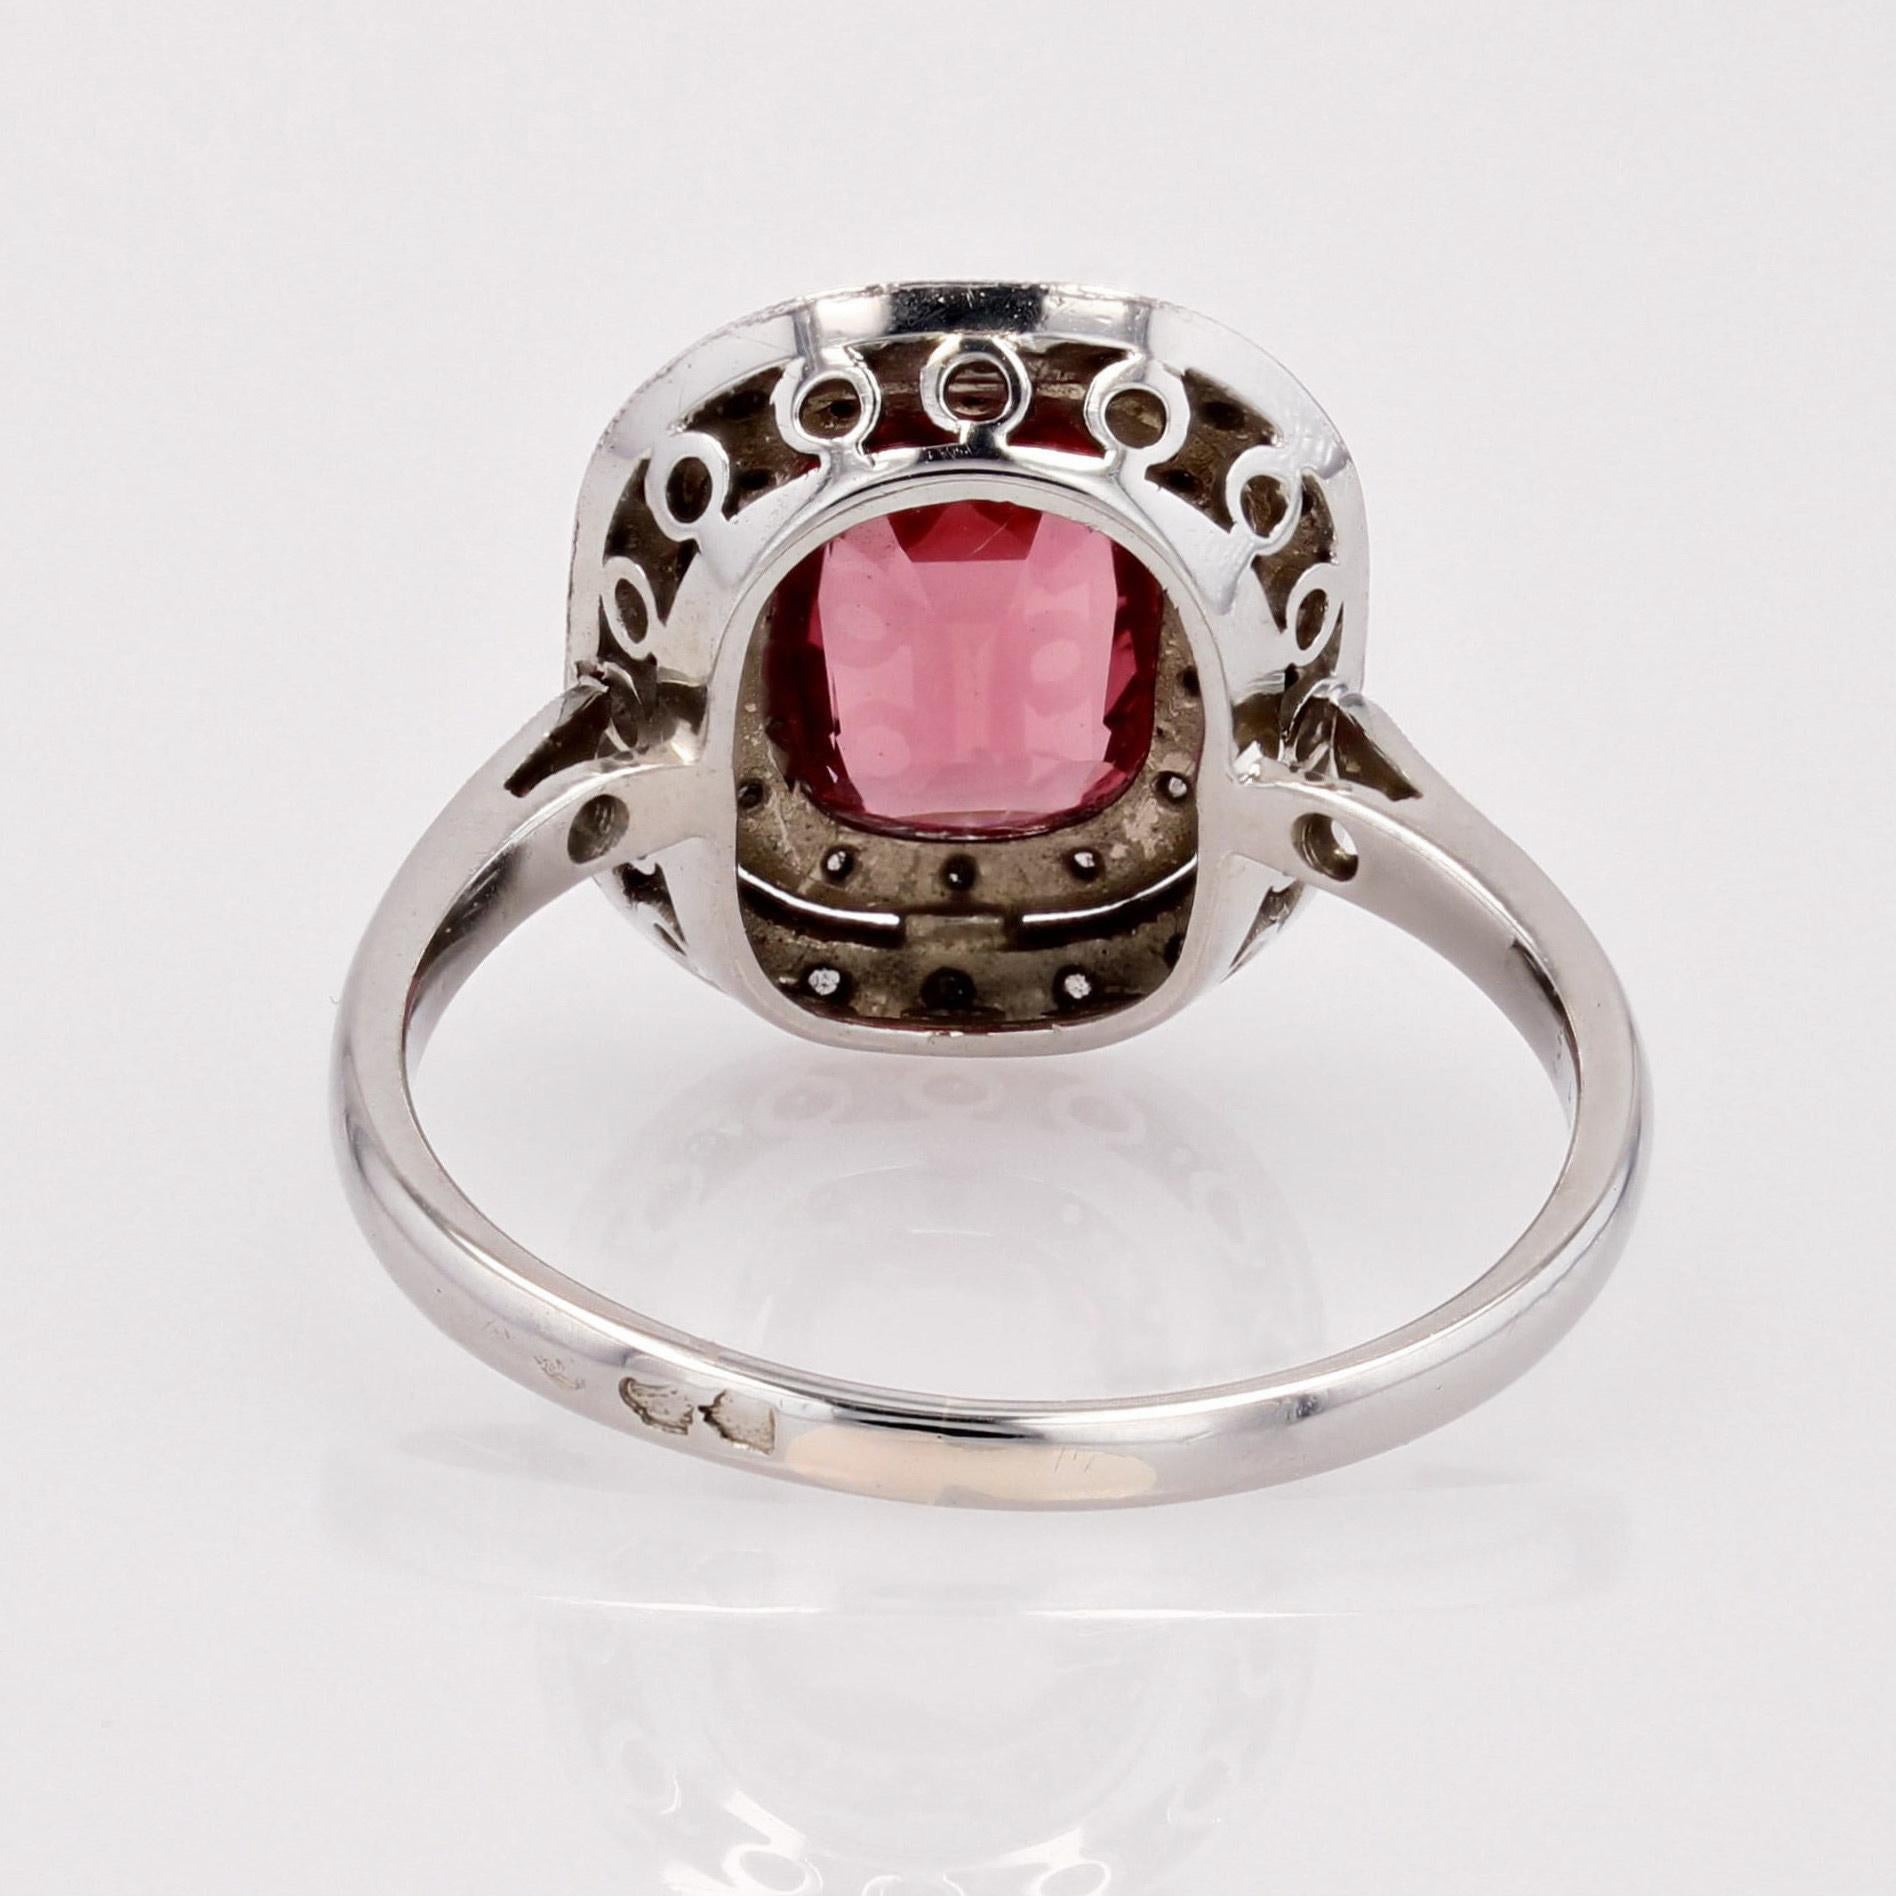 French 1930s 1.20 Carat Red Spinel Diamonds 18 Karat White Gold Ring For Sale 10